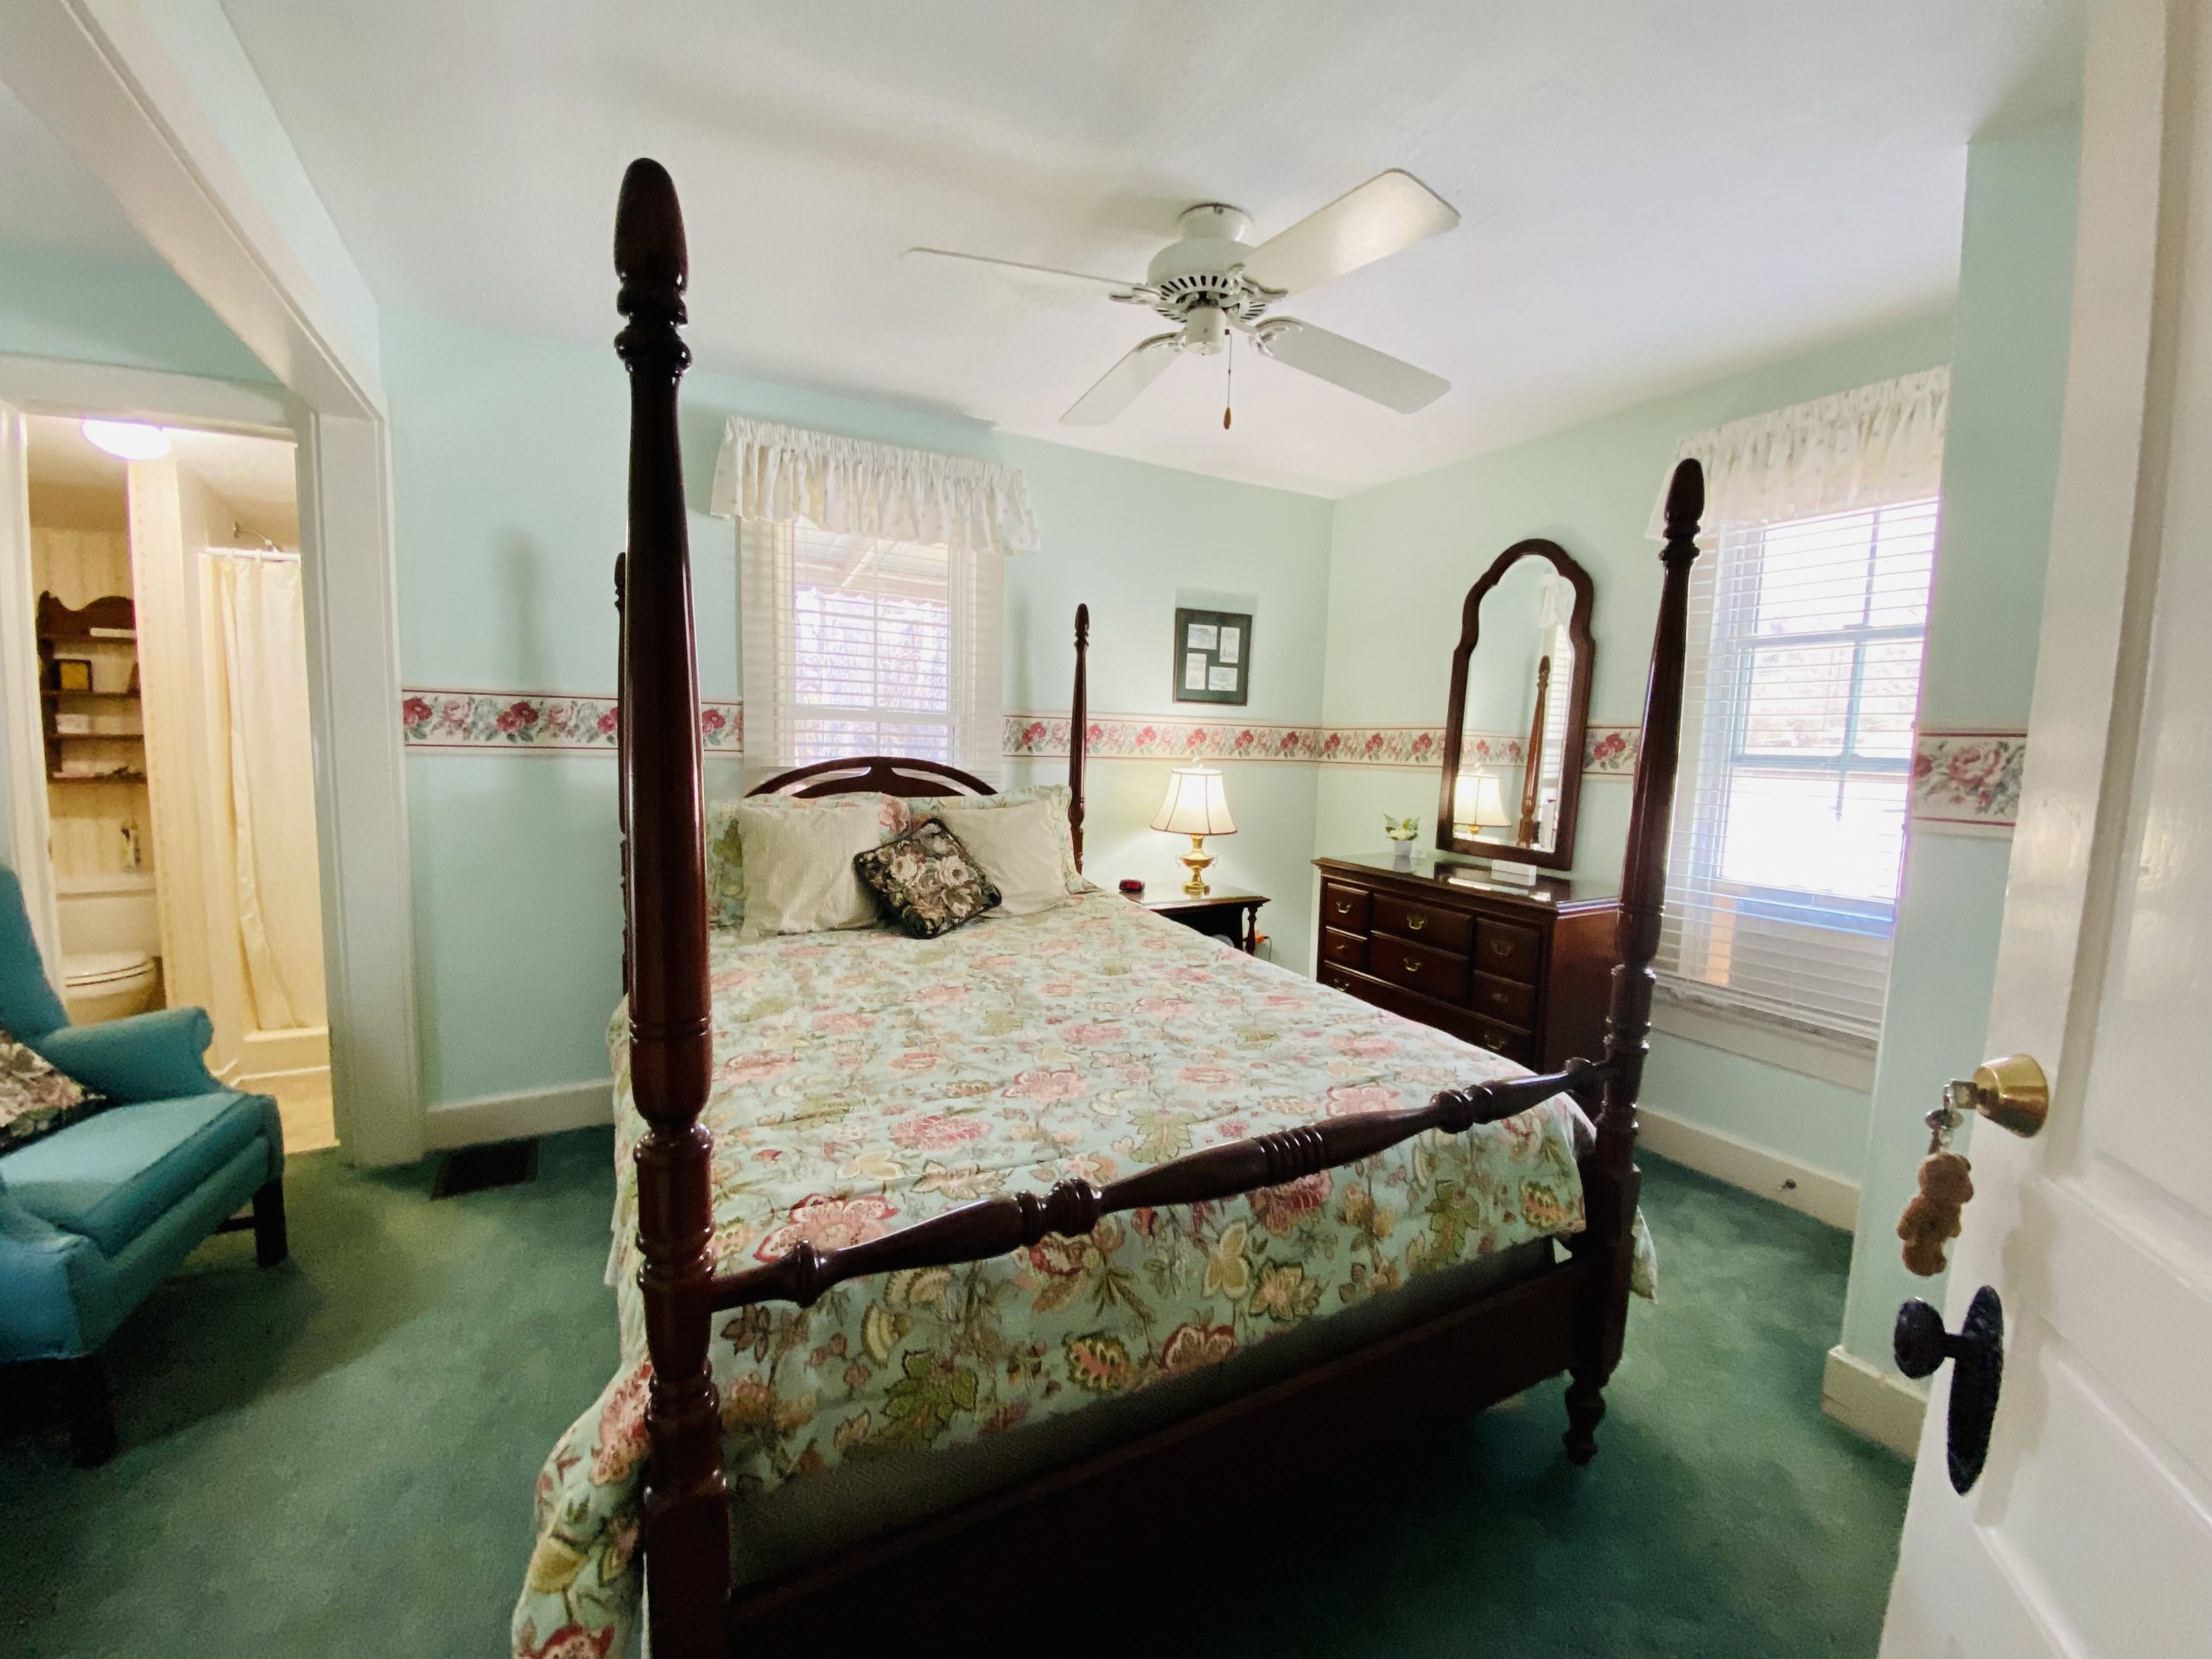 Virginia's room is traditionally decorated with a queen bed, 2 armchairs and a private shower room. The room is carpeted and at the rear of the house. This is one of the smaller bedrooms.